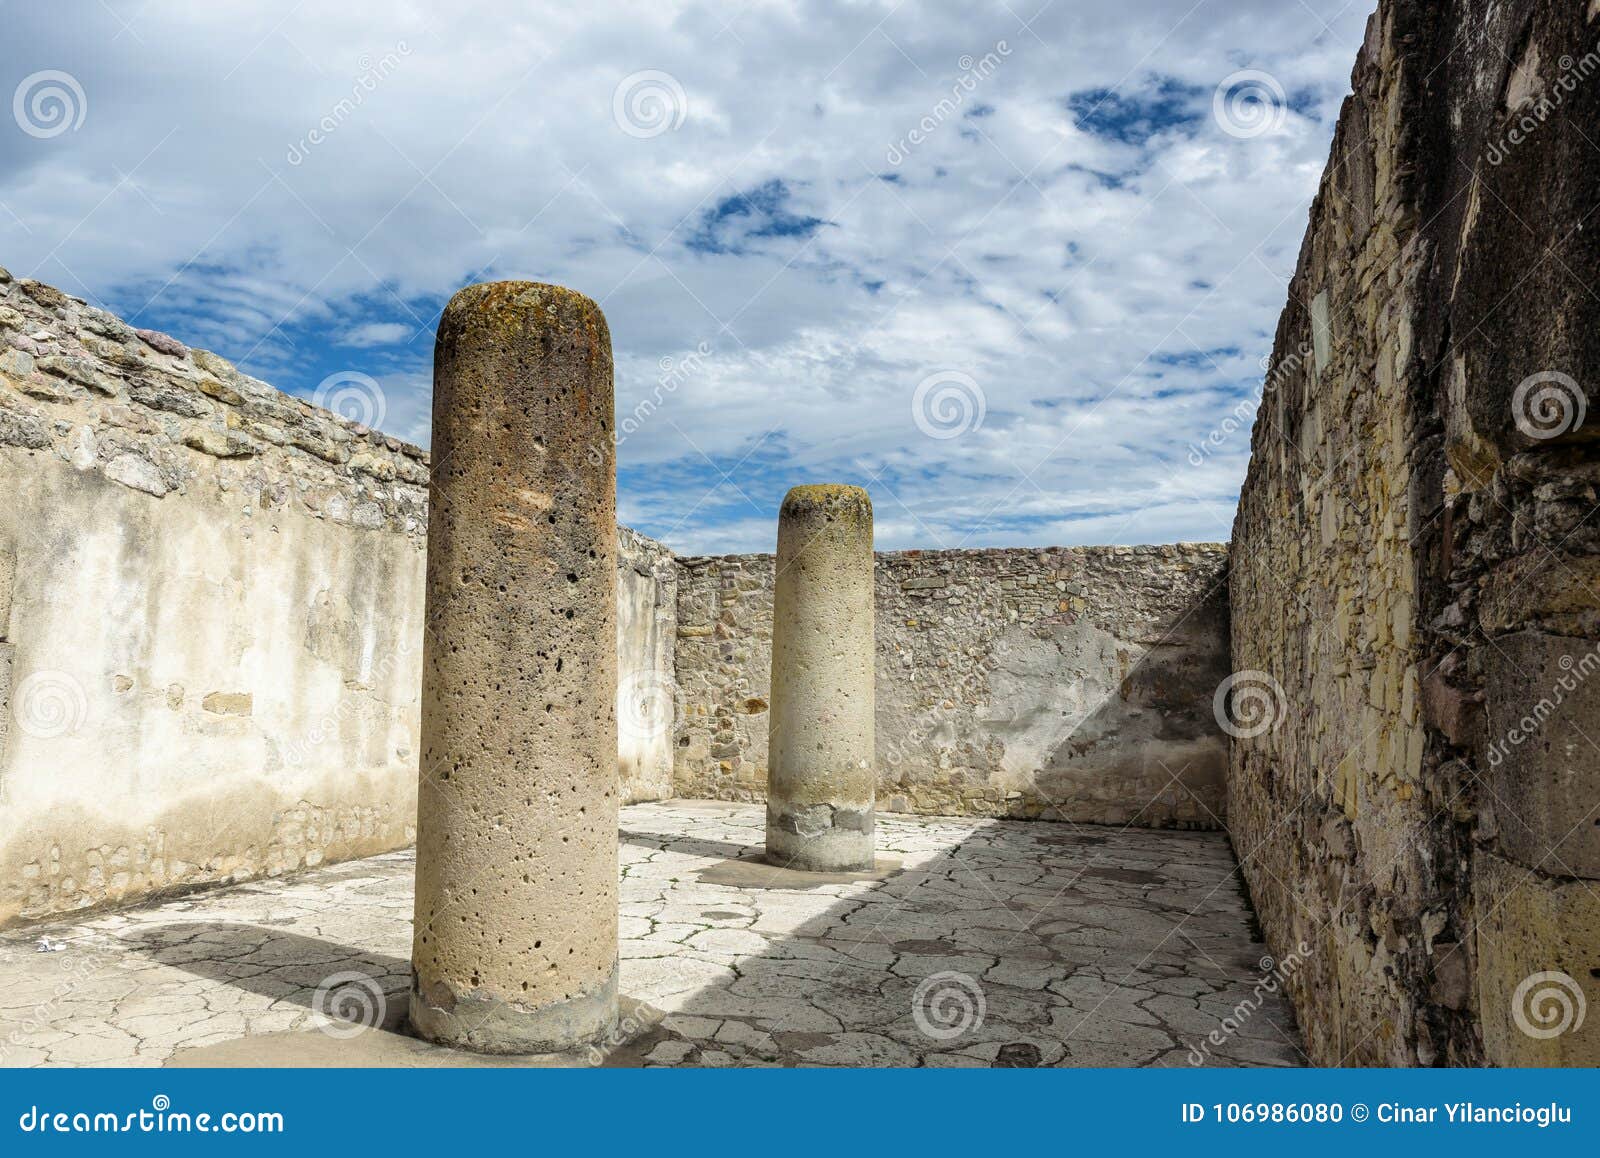 historical monument in an the ancient mesoamerican city